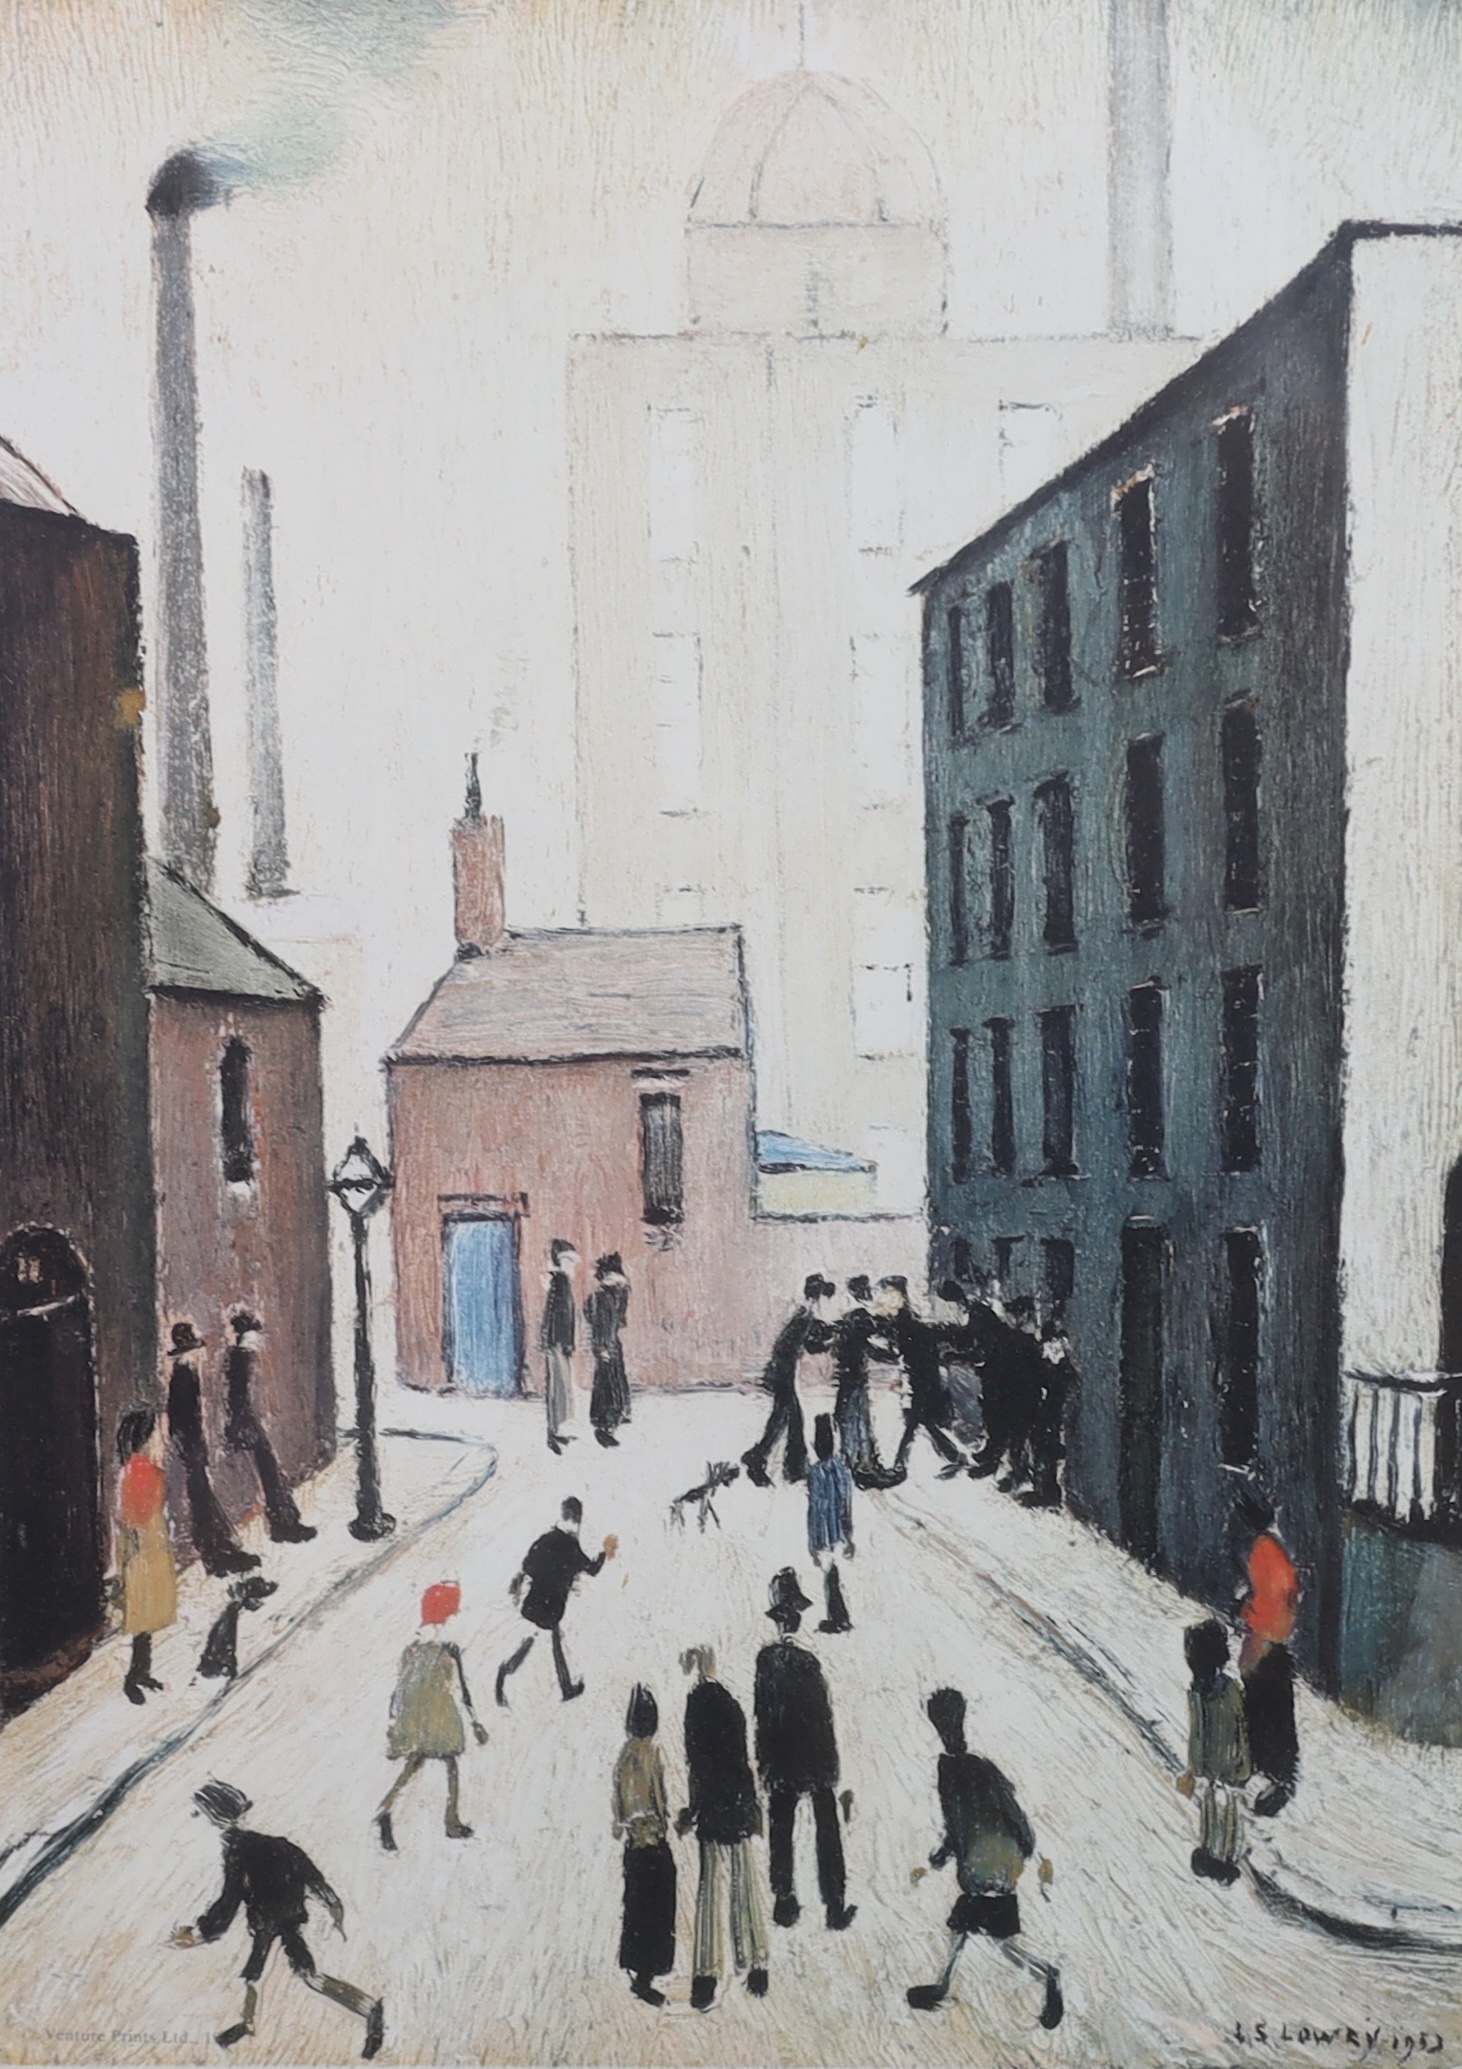 Laurence Stephen Lowry (English, 1887-1976), 'Industrial scene', offset colour lithograph, 37 x 26cm